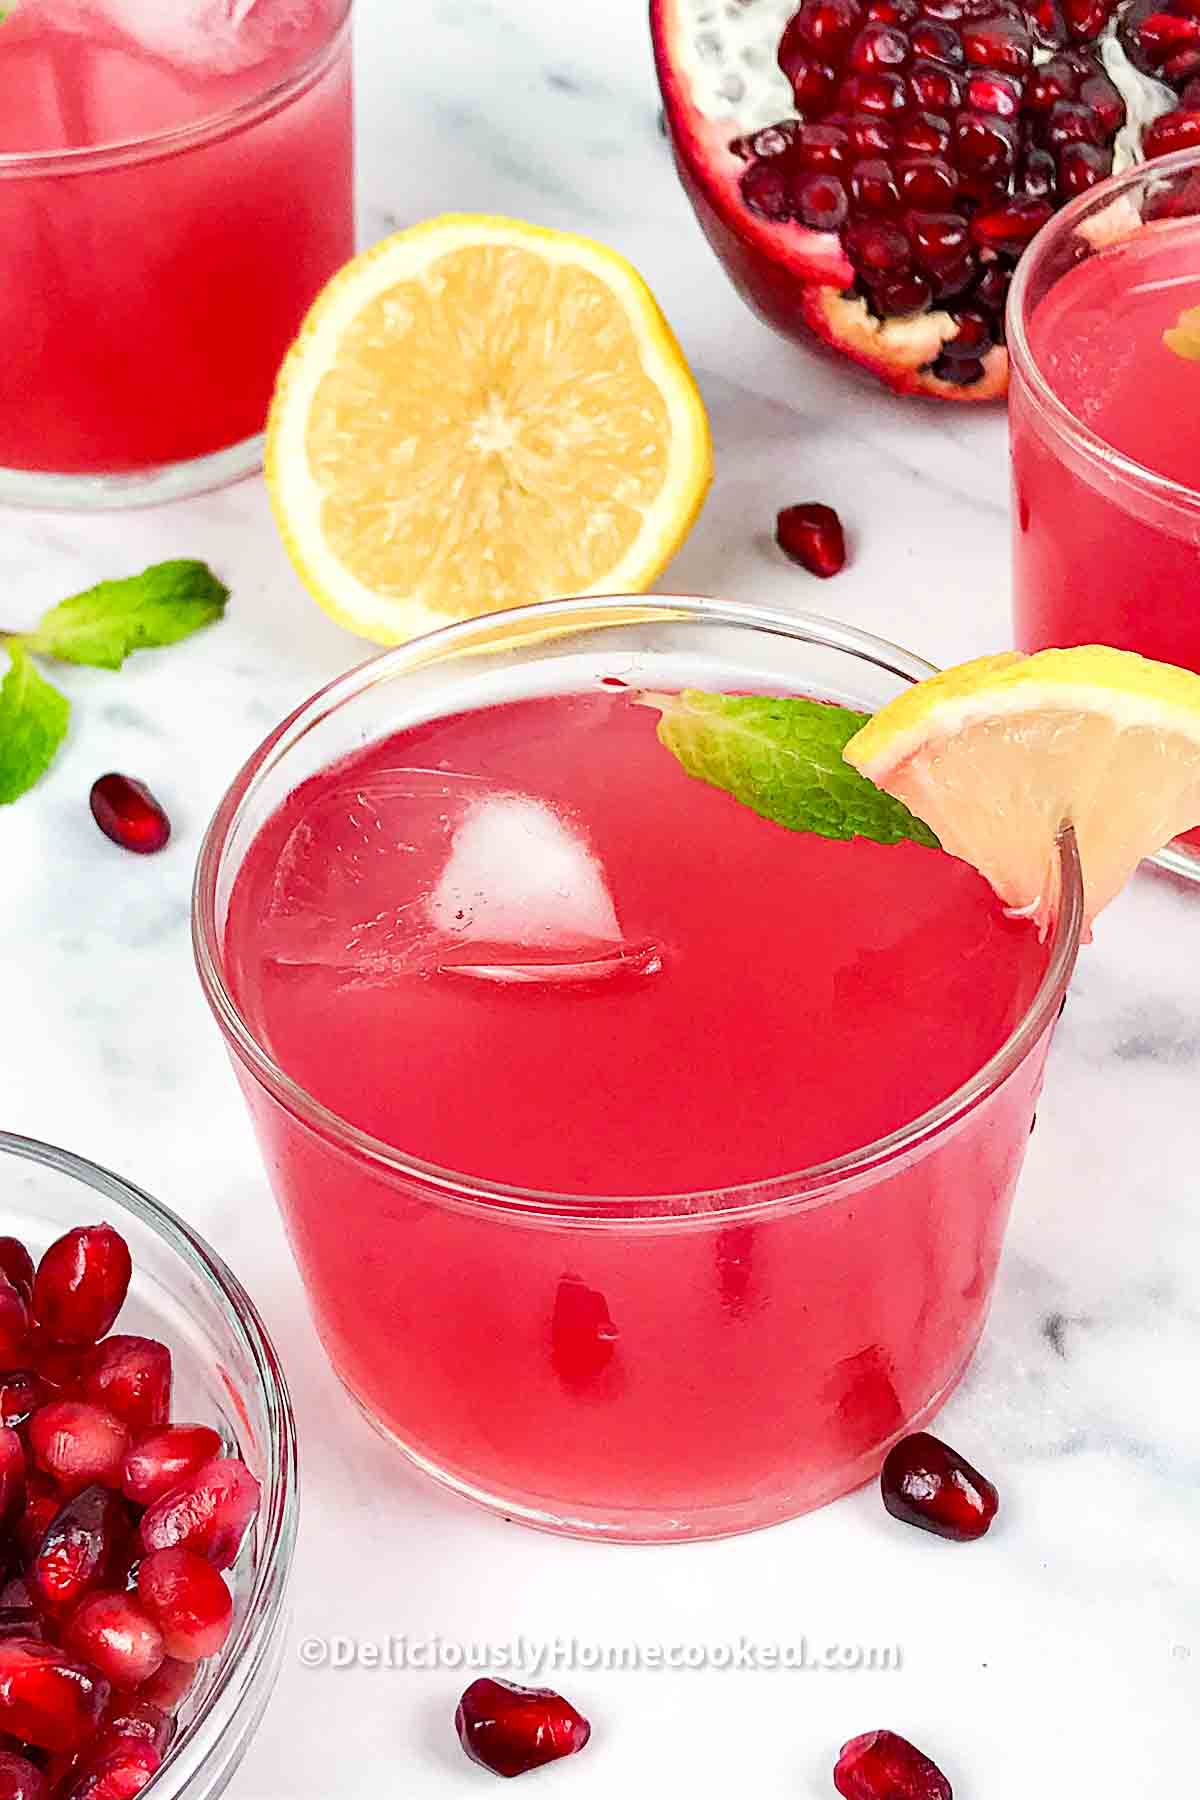 A short glass of pomegranate lemonade with a mint leaf in it, and in the table, lemon slices for garnishing, an open faced pomegranate and a small glass bowl filled with pomegranate arils.